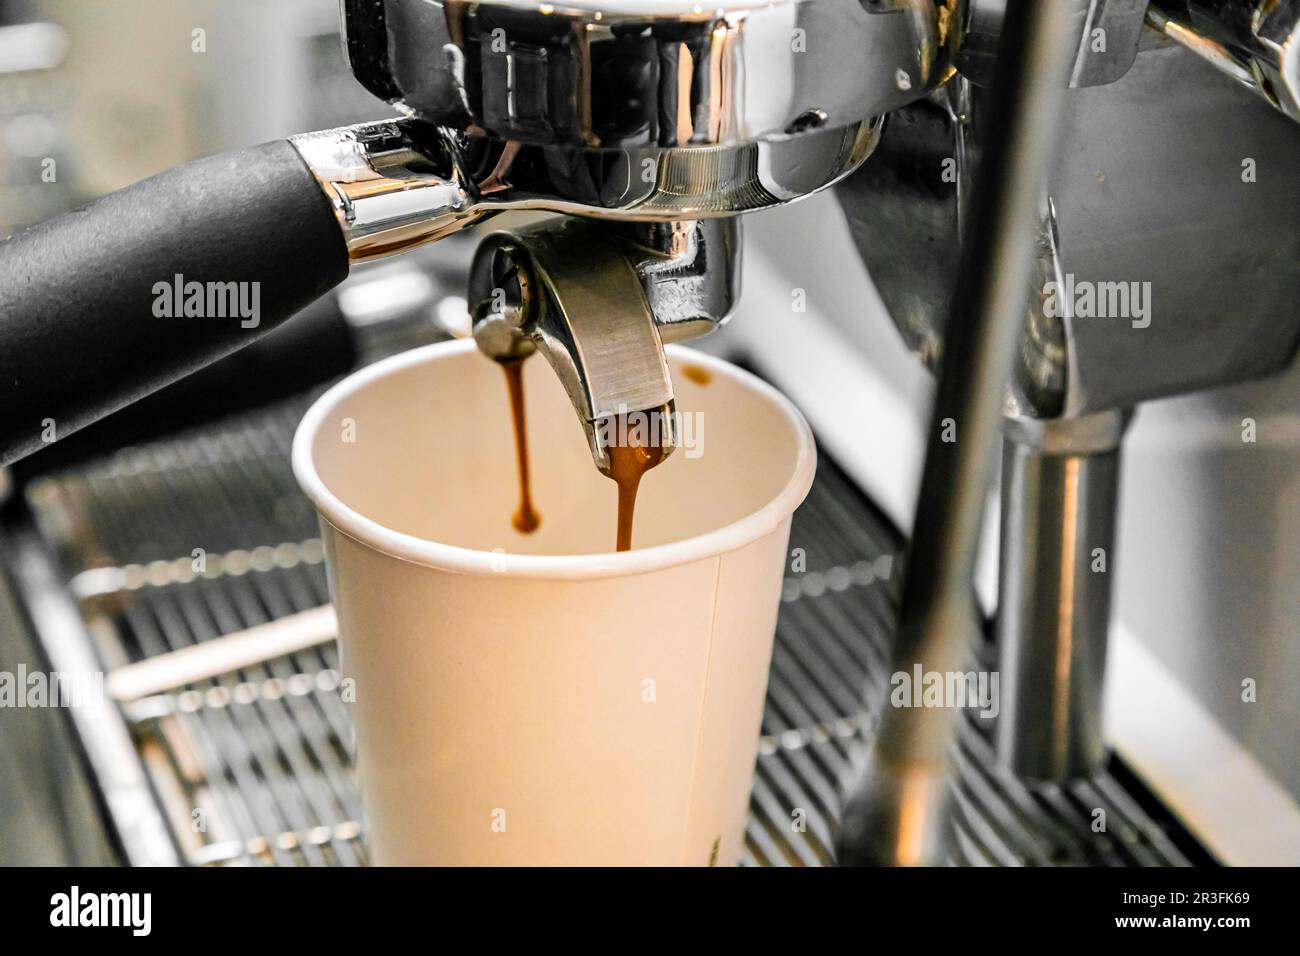 https://c8.alamy.com/comp/2R3FK69/professional-coffee-making-machine-pouring-a-take-out-drink-2R3FK69.jpg